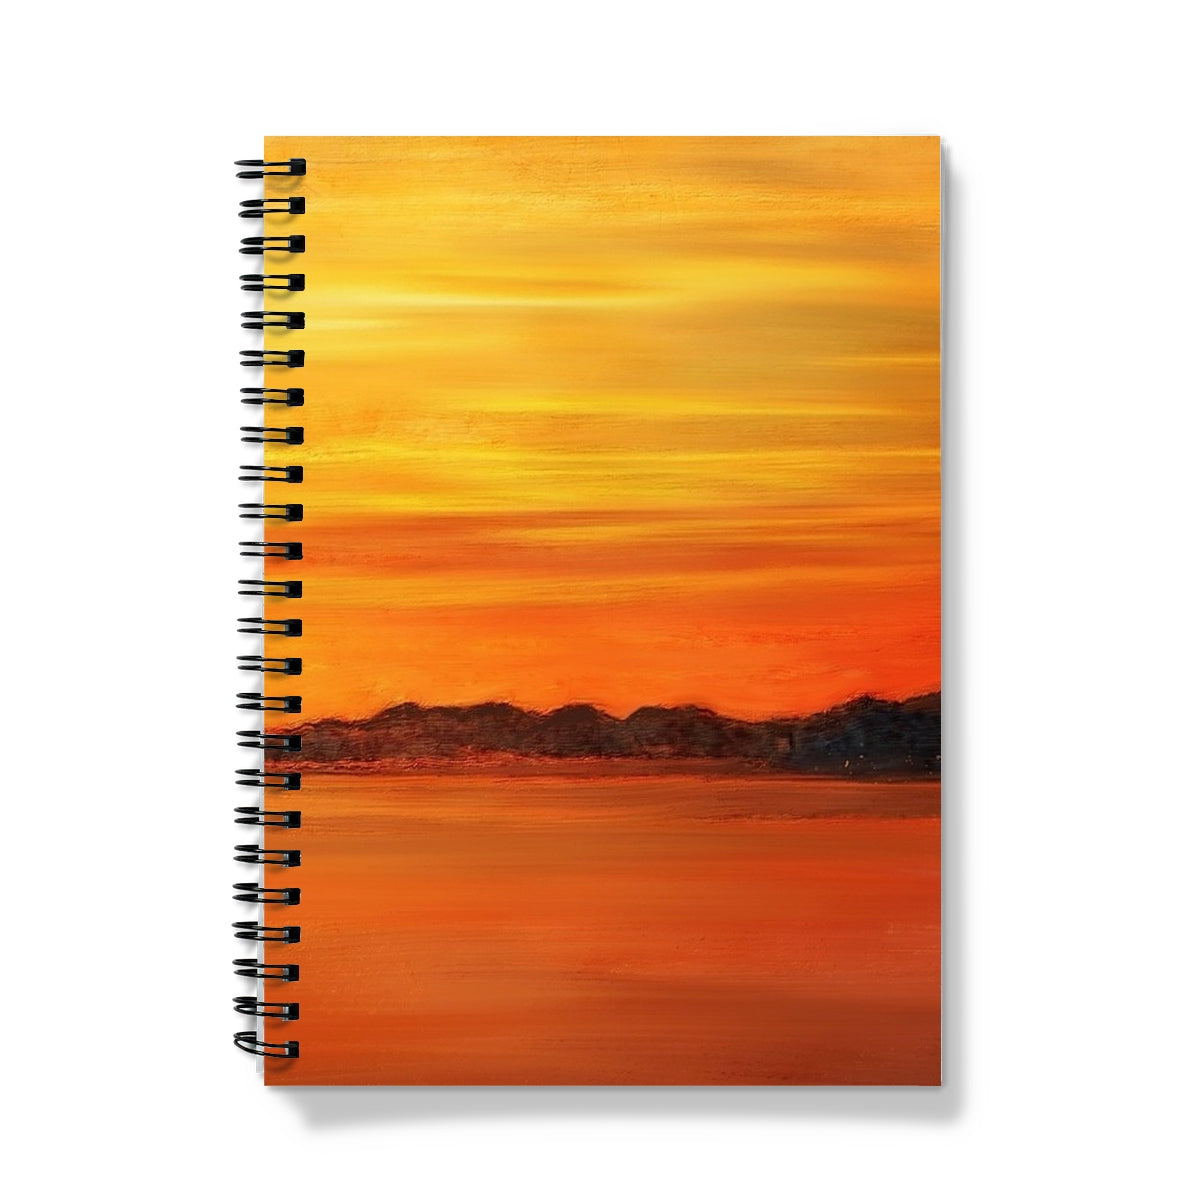 Loch Fyne Sunset Art Gifts Notebook-Journals & Notebooks-Scottish Lochs & Mountains Art Gallery-A5-Graph-Paintings, Prints, Homeware, Art Gifts From Scotland By Scottish Artist Kevin Hunter